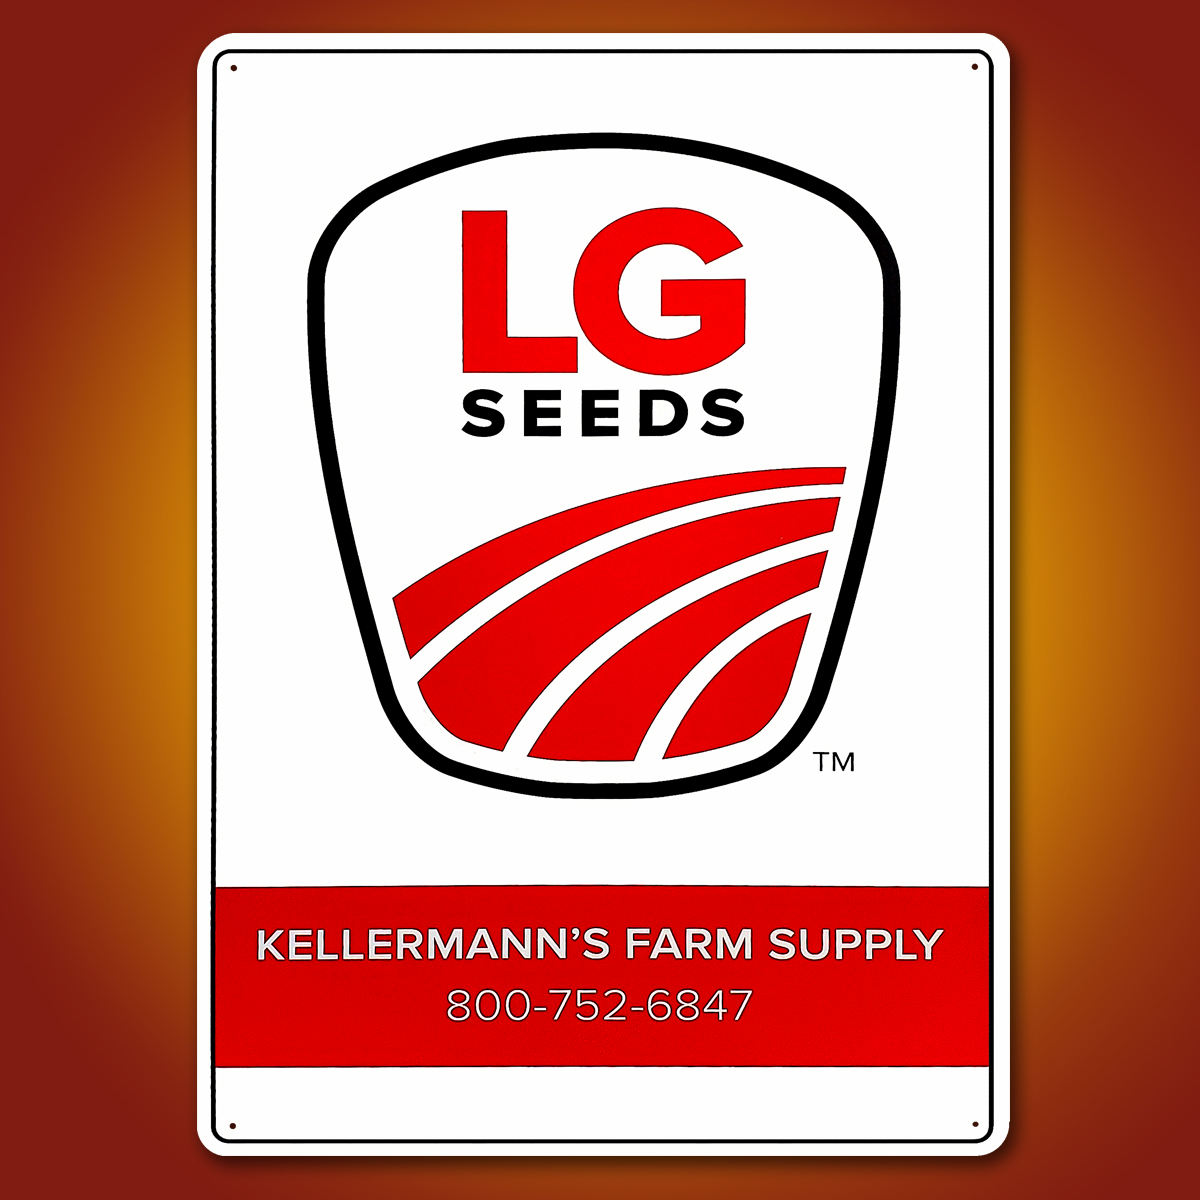 Why T&T-LG-Seeds-2